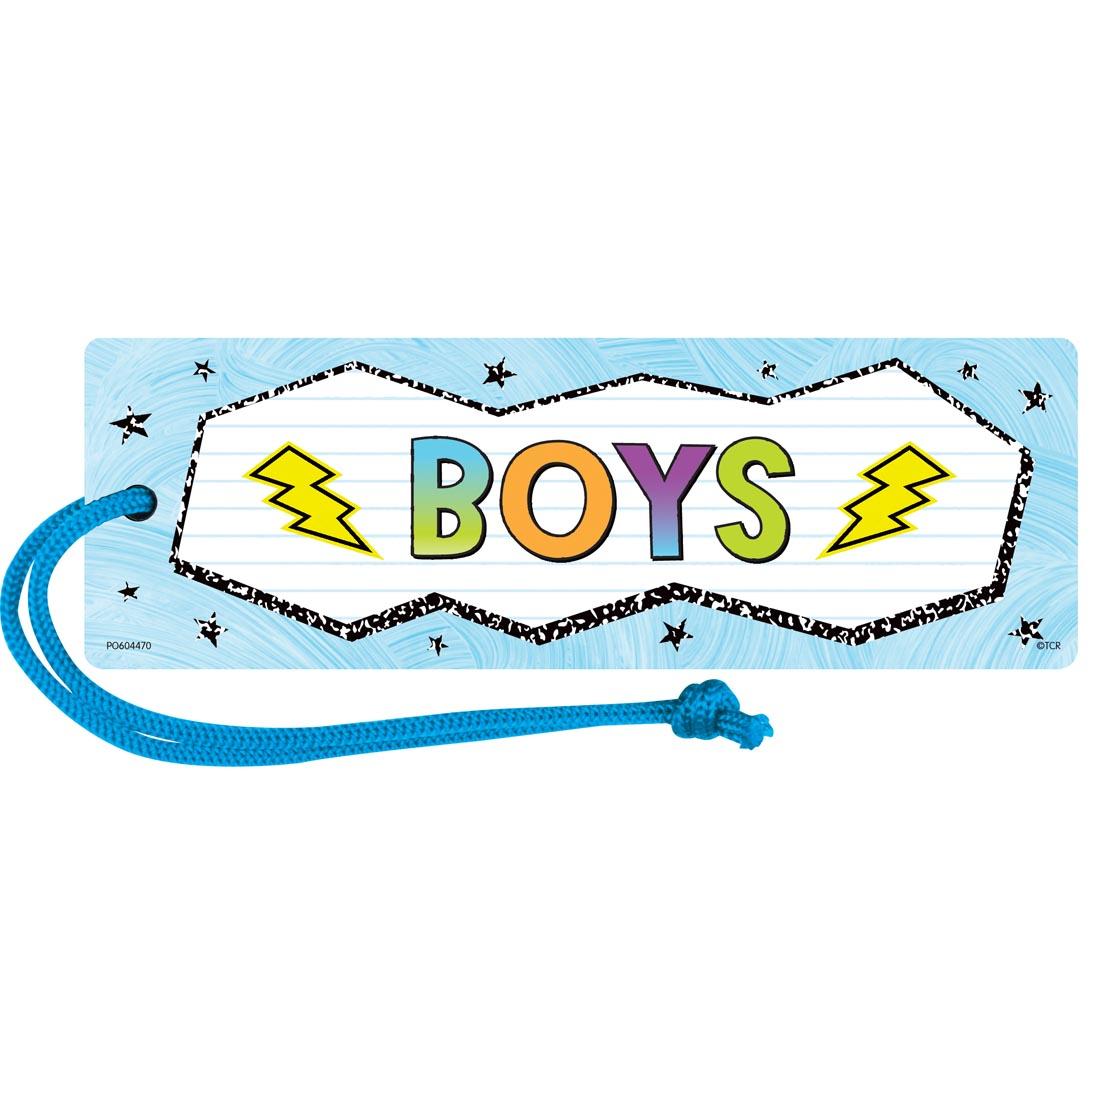 Magnetic Boys Pass from the Brights 4Ever collection by Teacher Created Resources